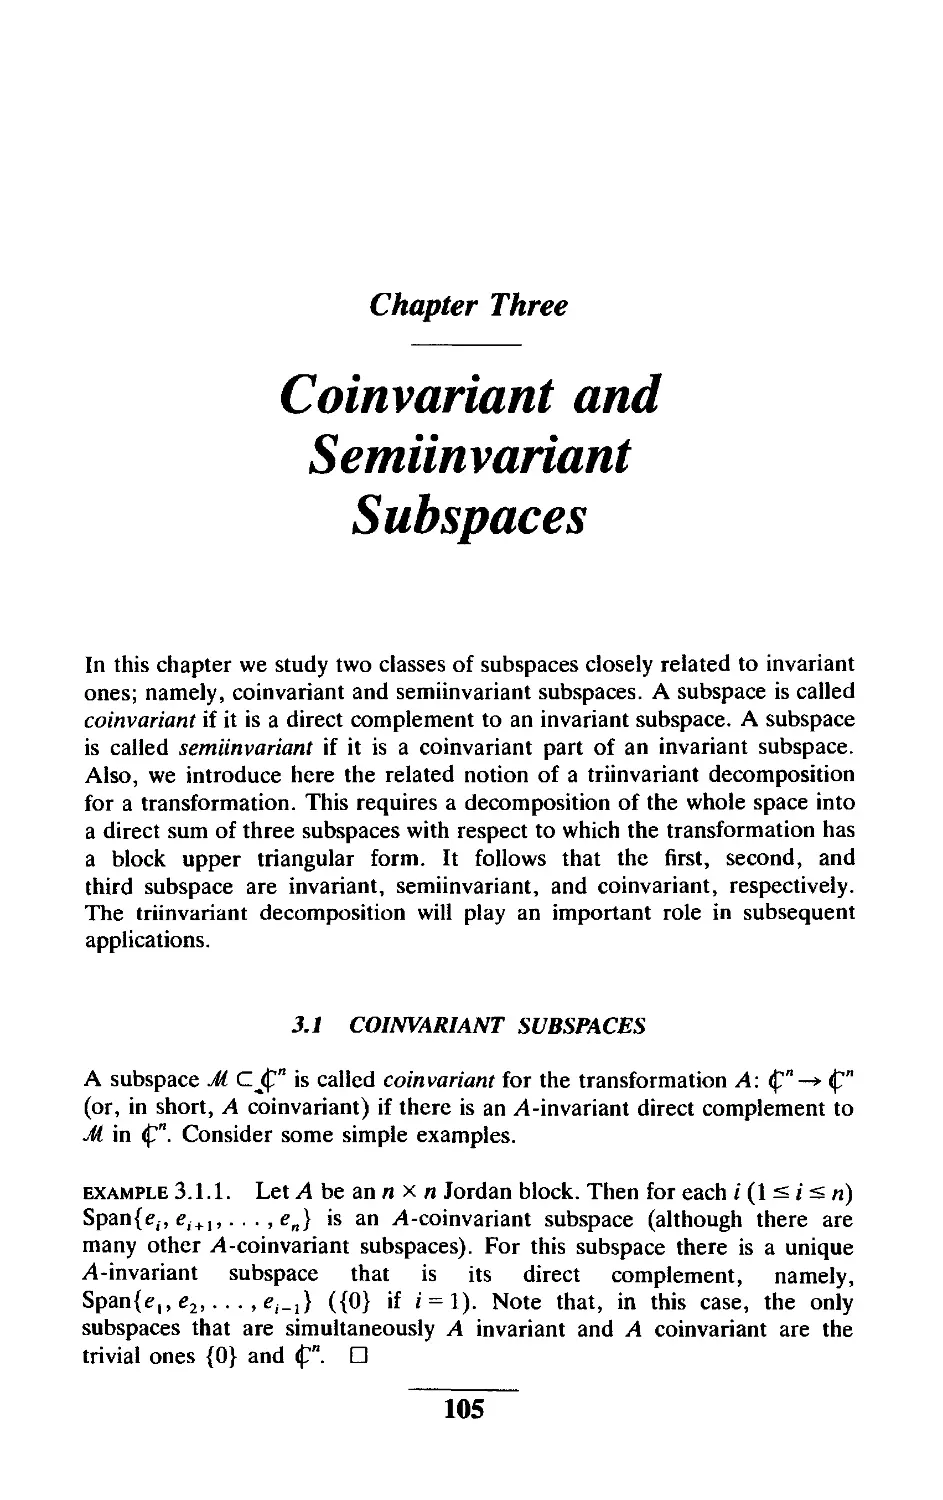 Chapter Three Coinvariant and Semiinvariant Subspaces